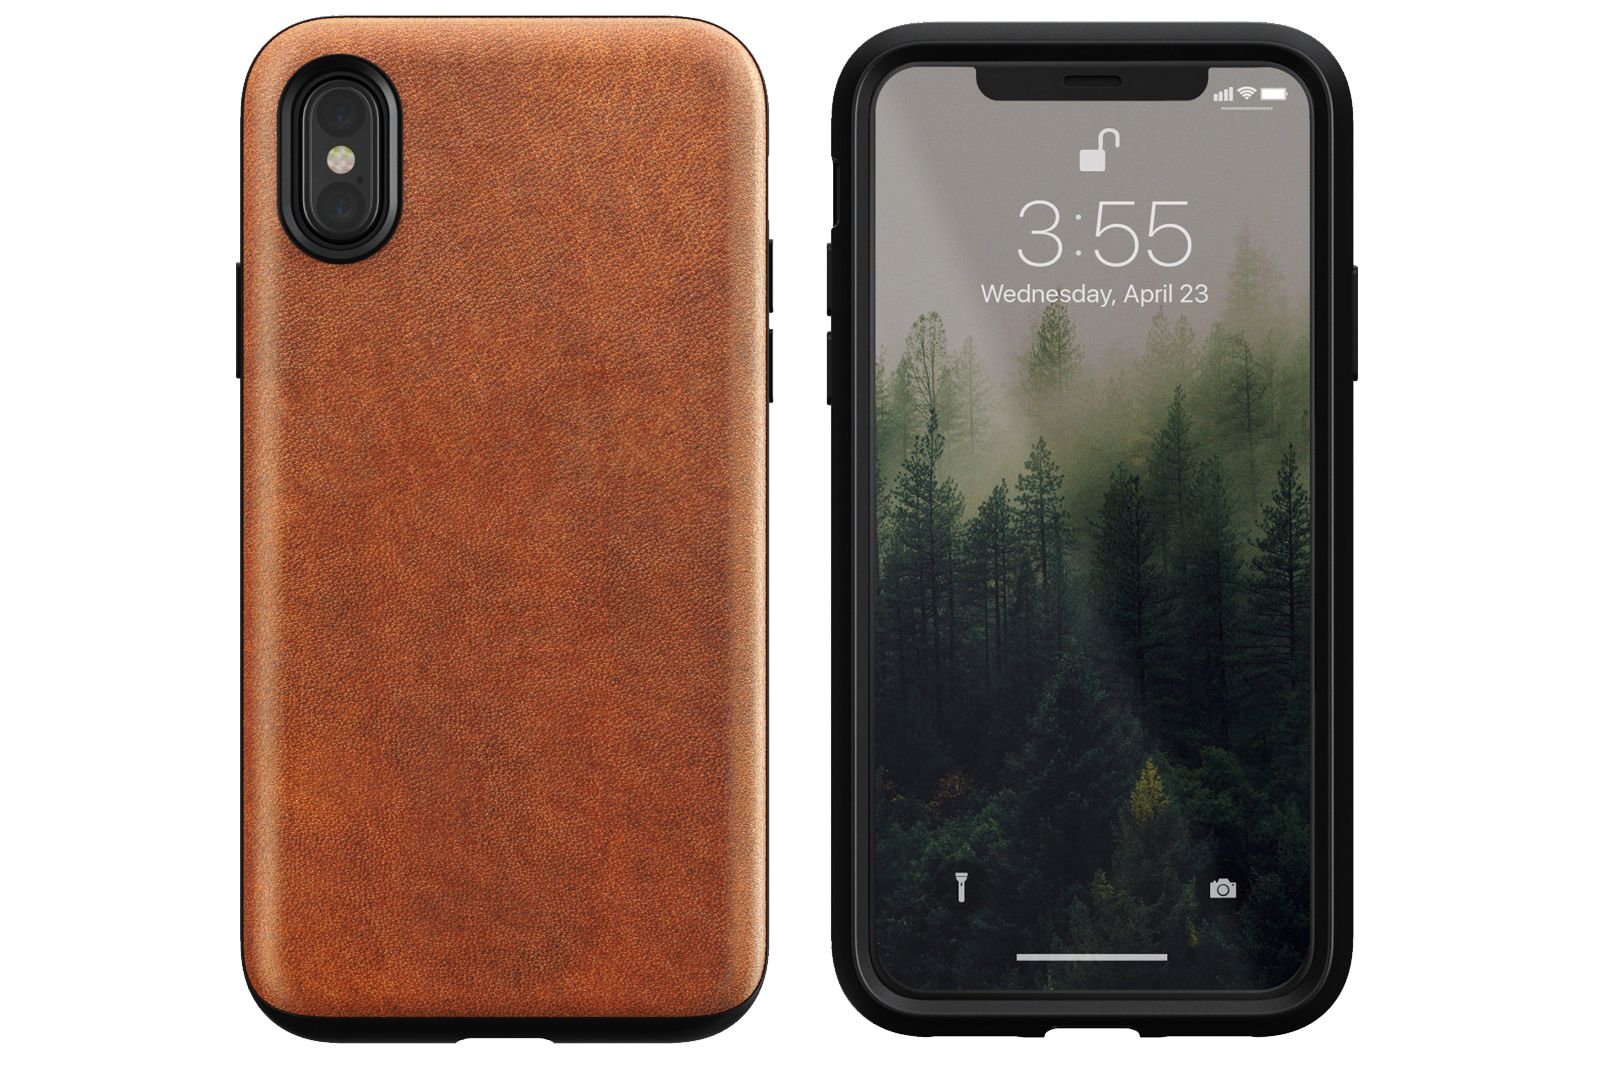 Best Iphone X Cases Protect Your New Apple Device image 10